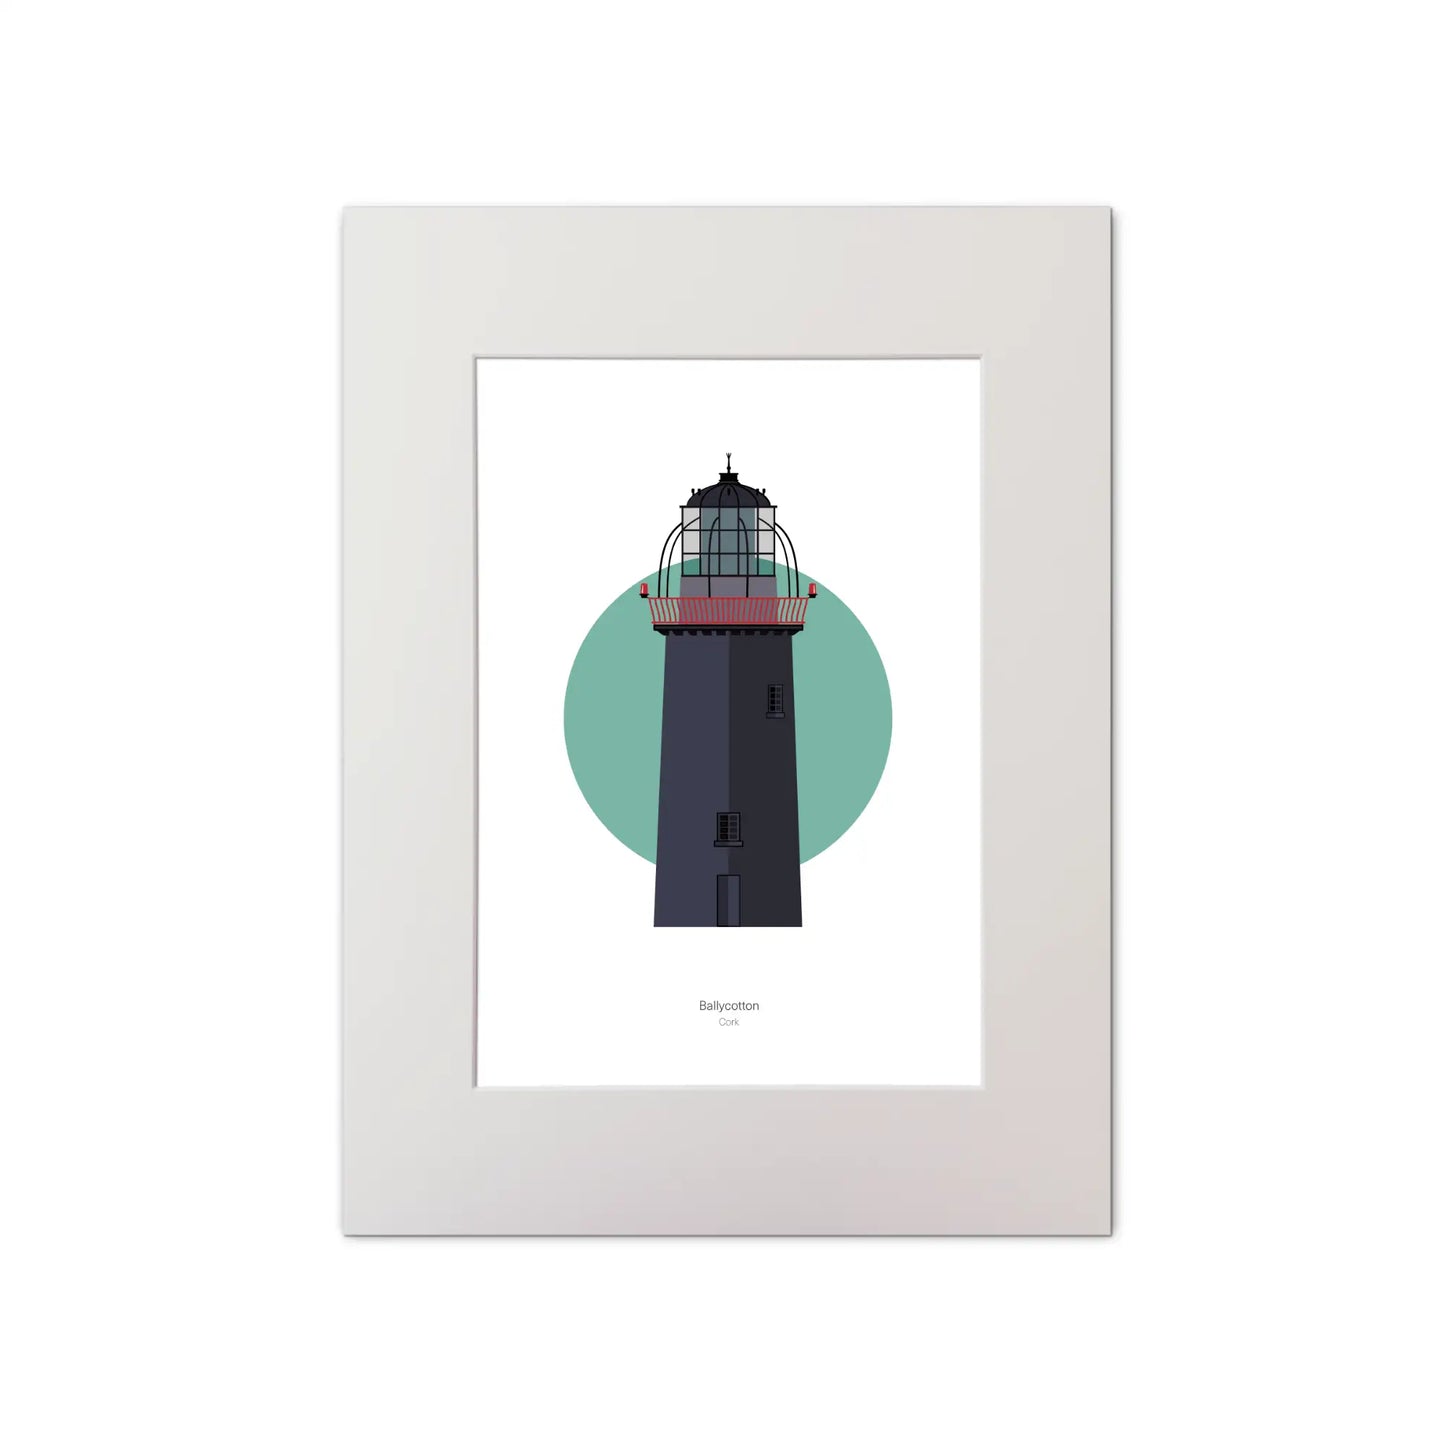 Illustration of Ballycotton lighthouse on a white background inside light blue square, mounted and measuring 15x20cm.